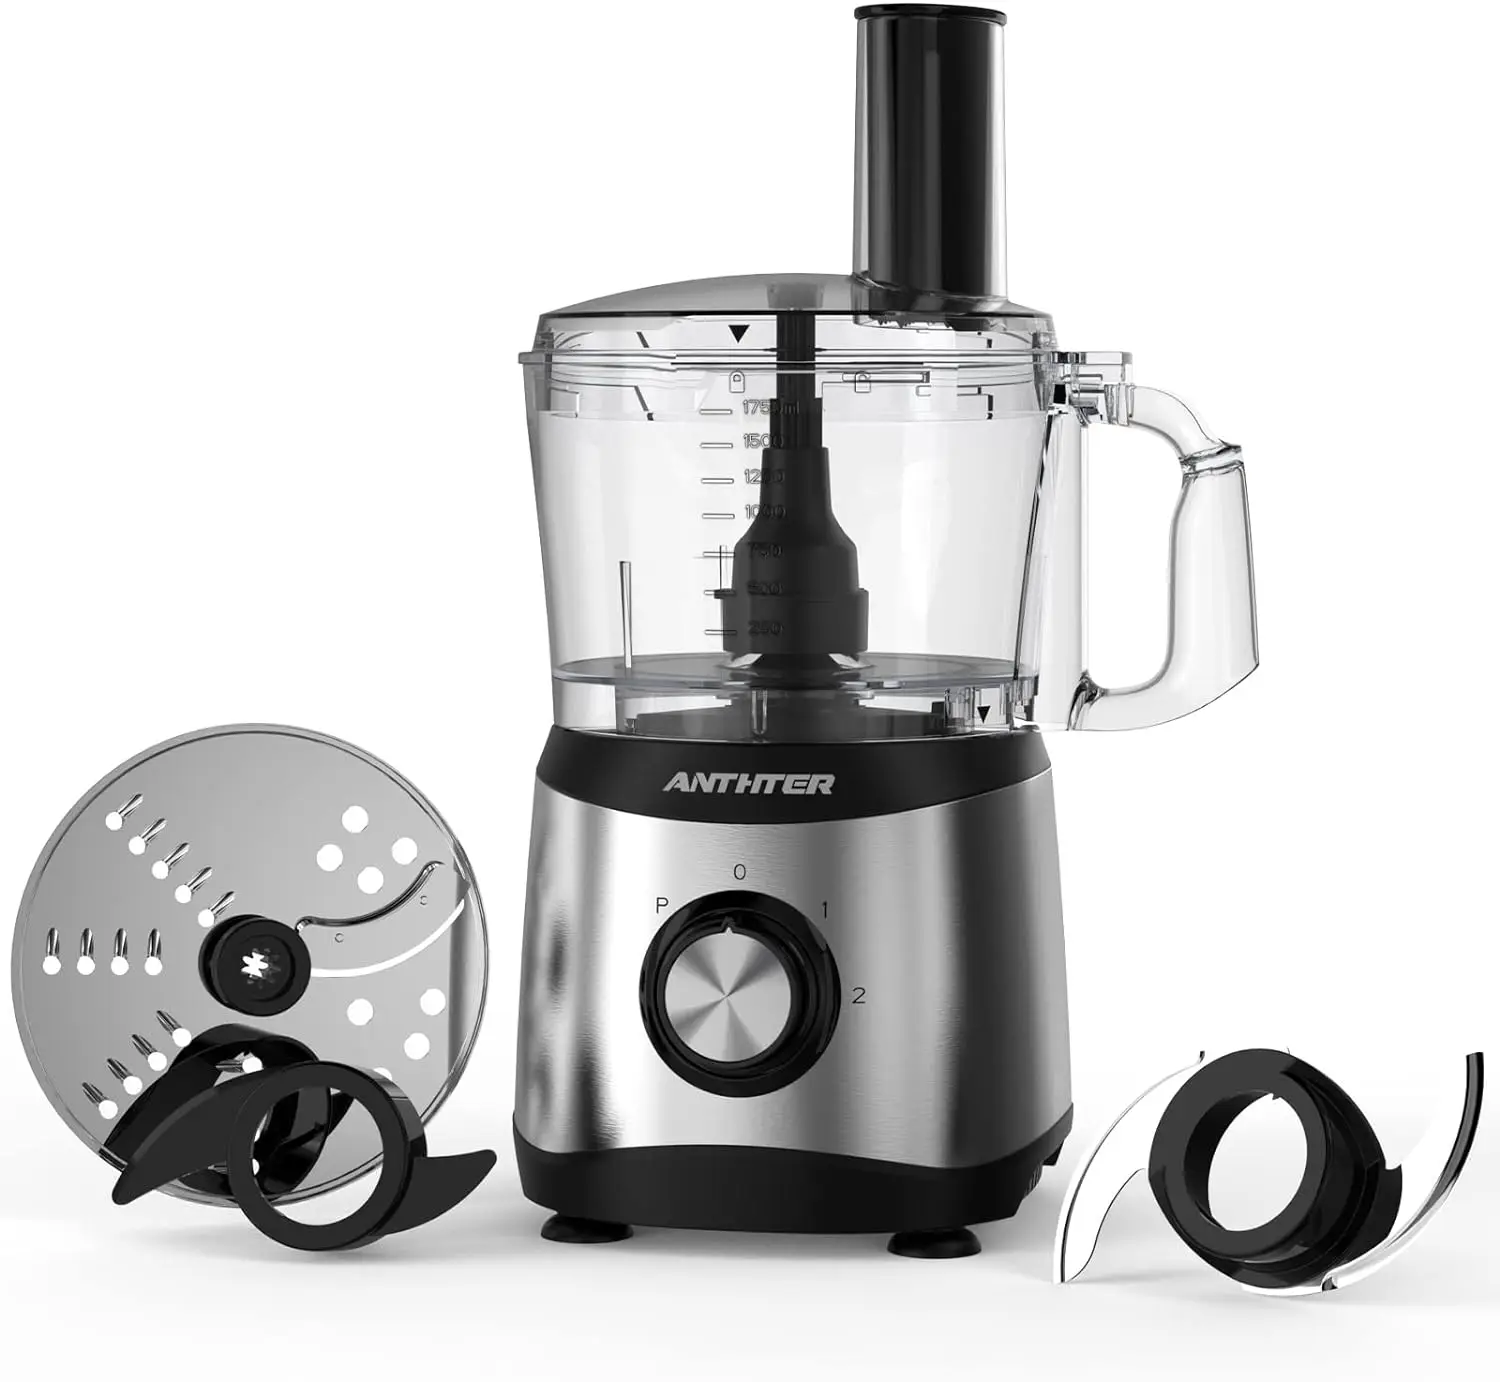 

CY-367 Food Processor & Vegetable Chopper for Slicing, Shredding, Chopping, Dough and Purees, 7 Processor Cups, 600W,Stainle